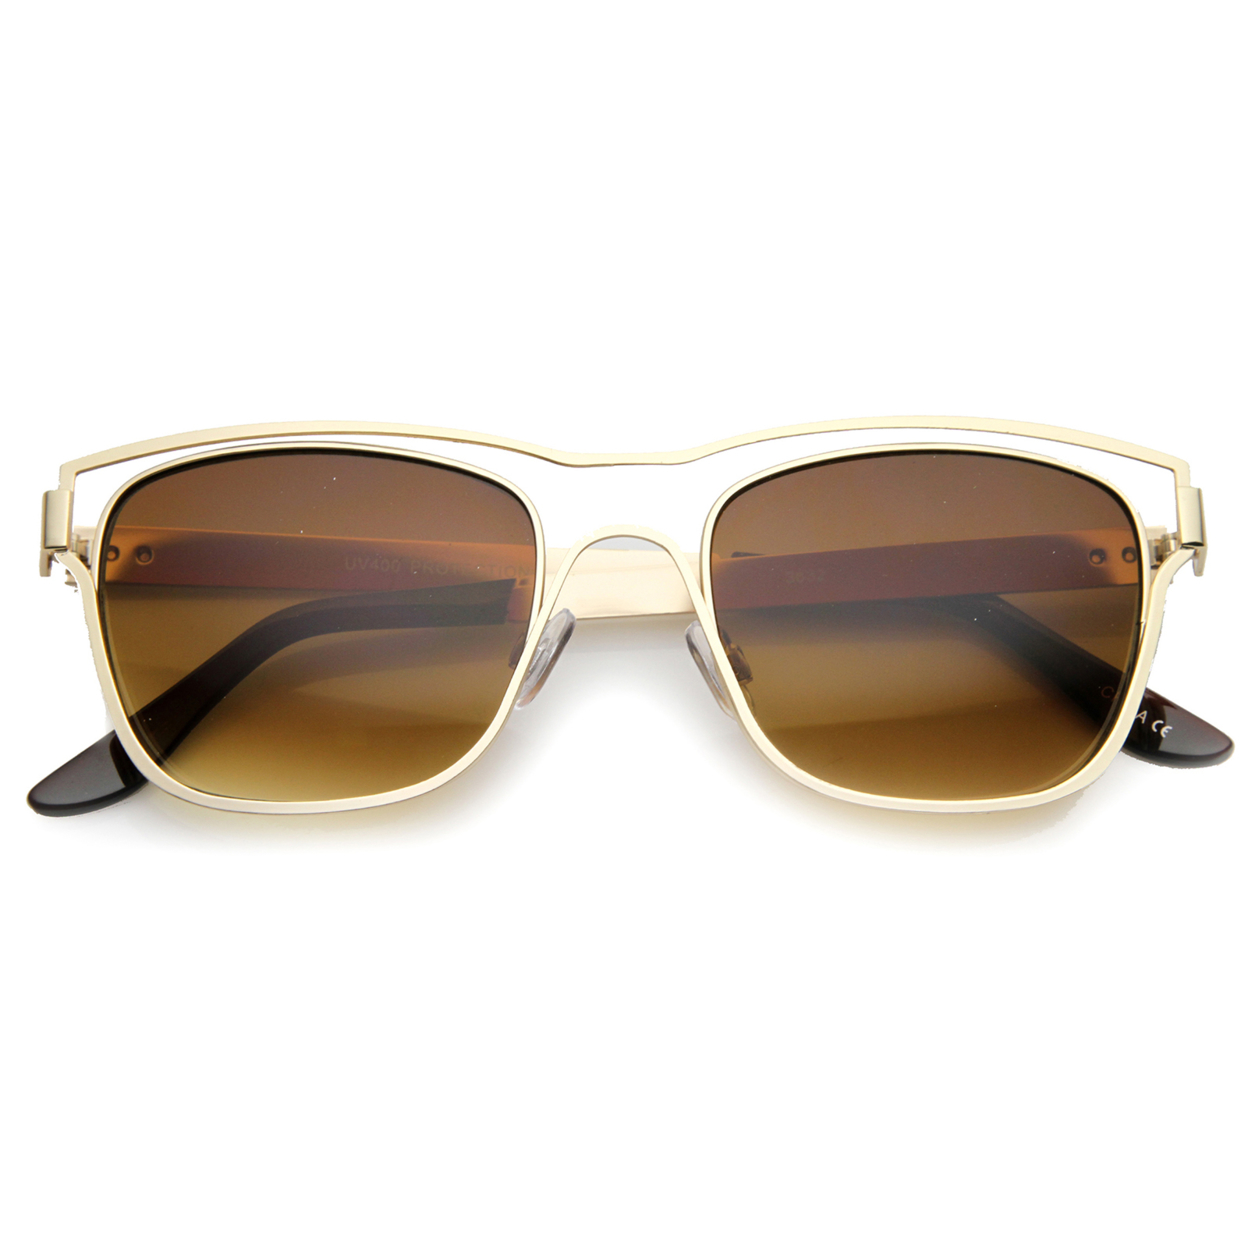 Unisex Horn Rimmed Sunglasses With UV400 Protected Composite Lens 9871 - Gold / Brown